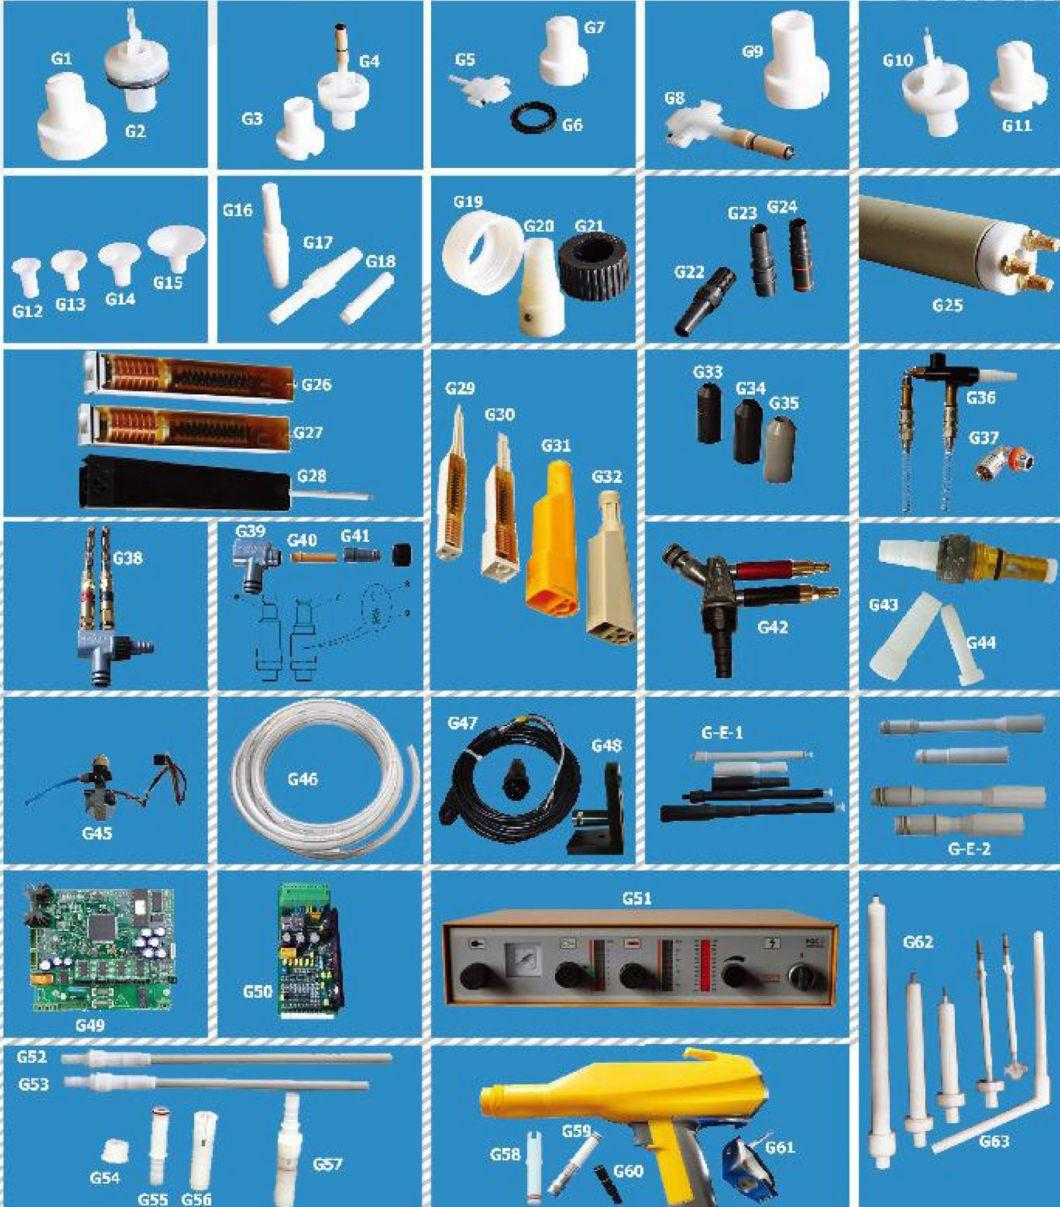 1007 931 Electrostatic Powder Coating Gun Spare Parts (non OEM part- compatible with certain gema products)